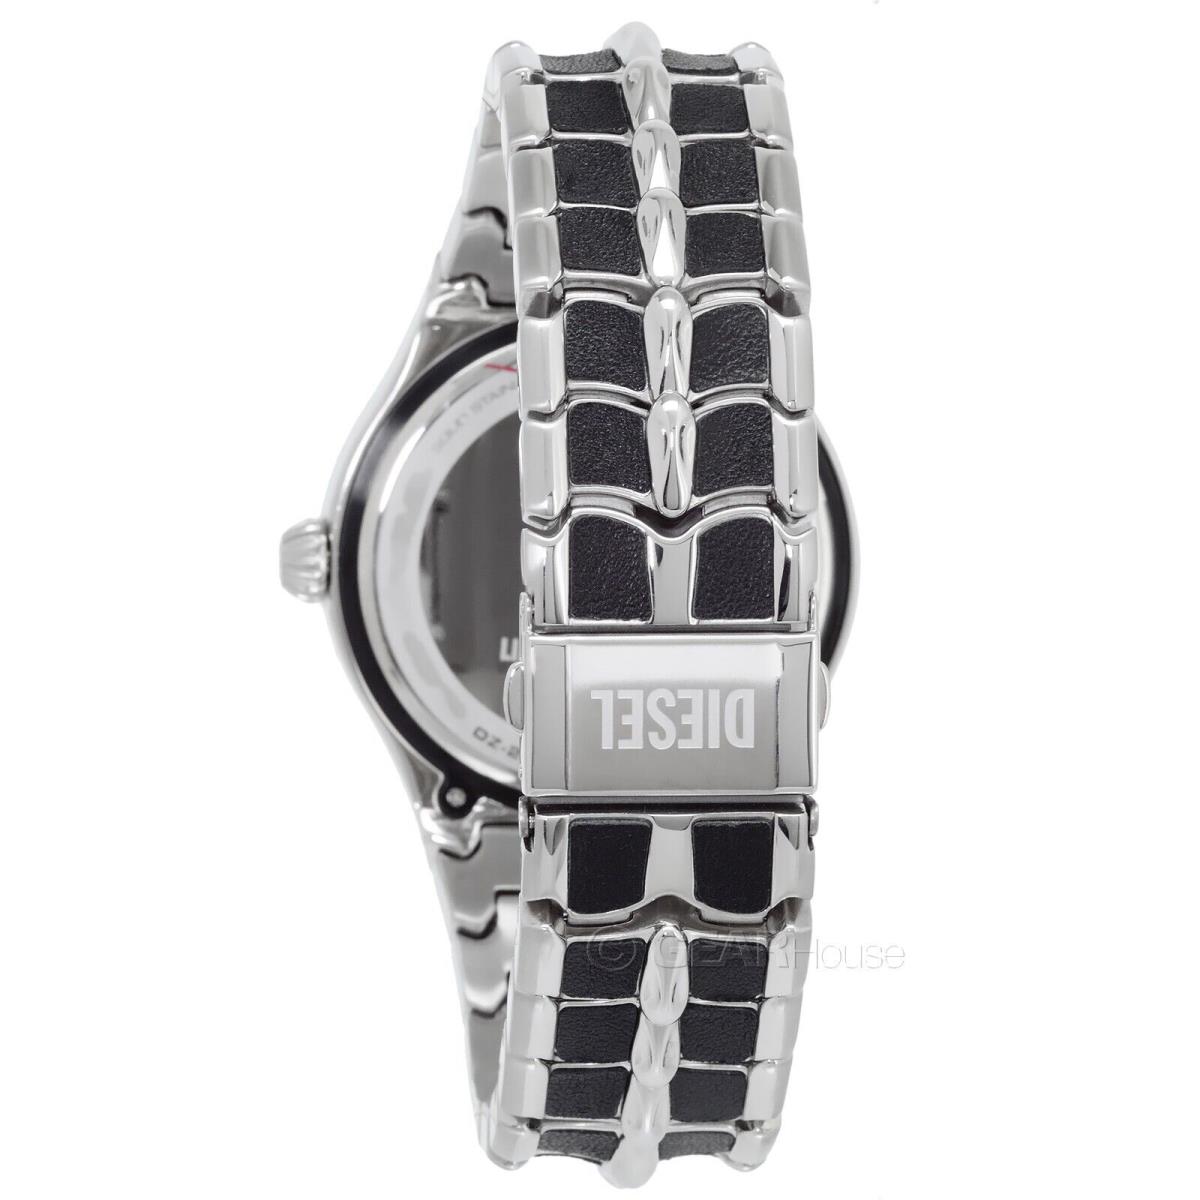 Diesel Limited Edition Vert Mens Watch Reptilian Stainless Steel Black Leather